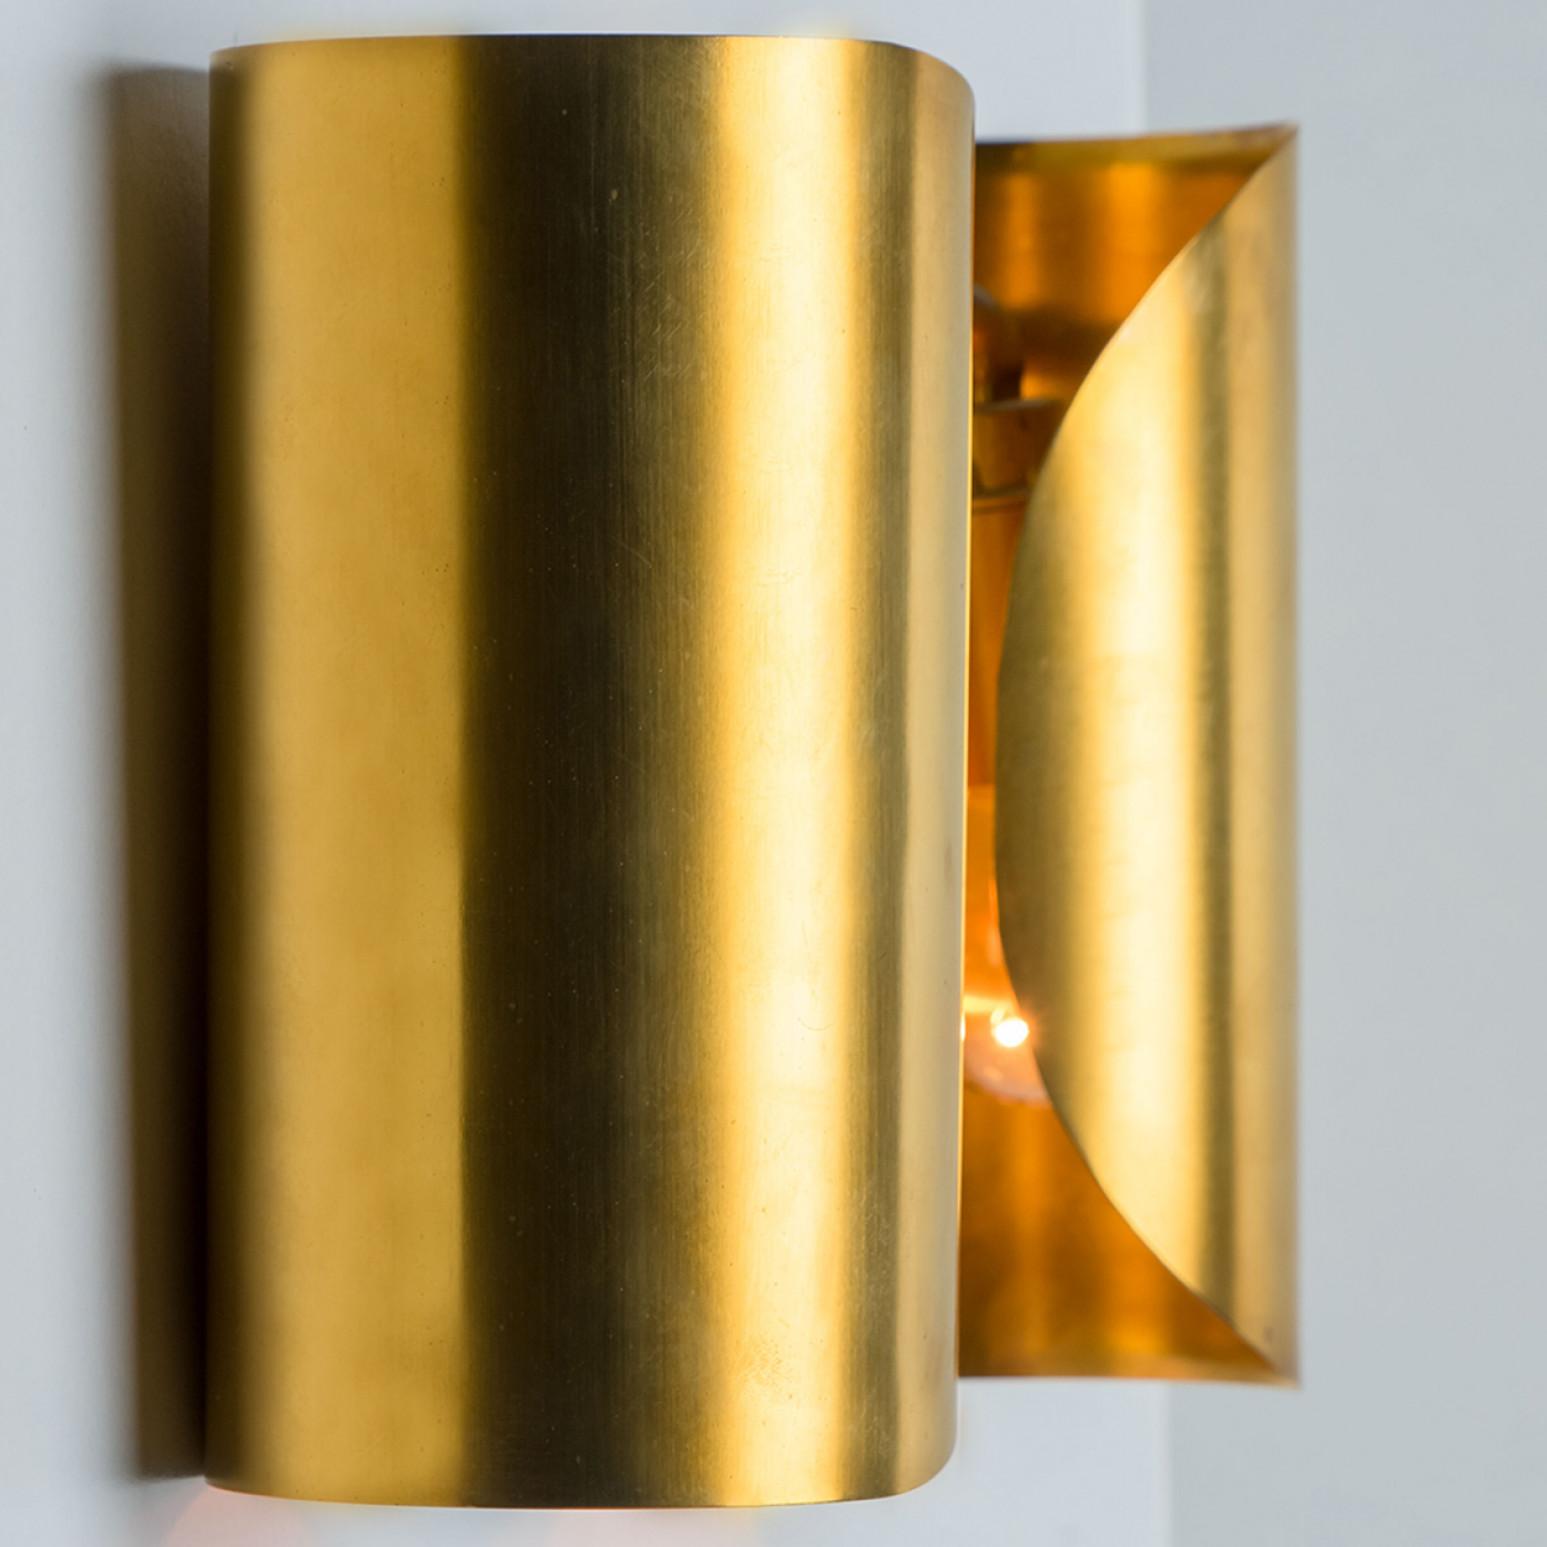 Several Curved Brass Wall Lights, 1970s For Sale 2